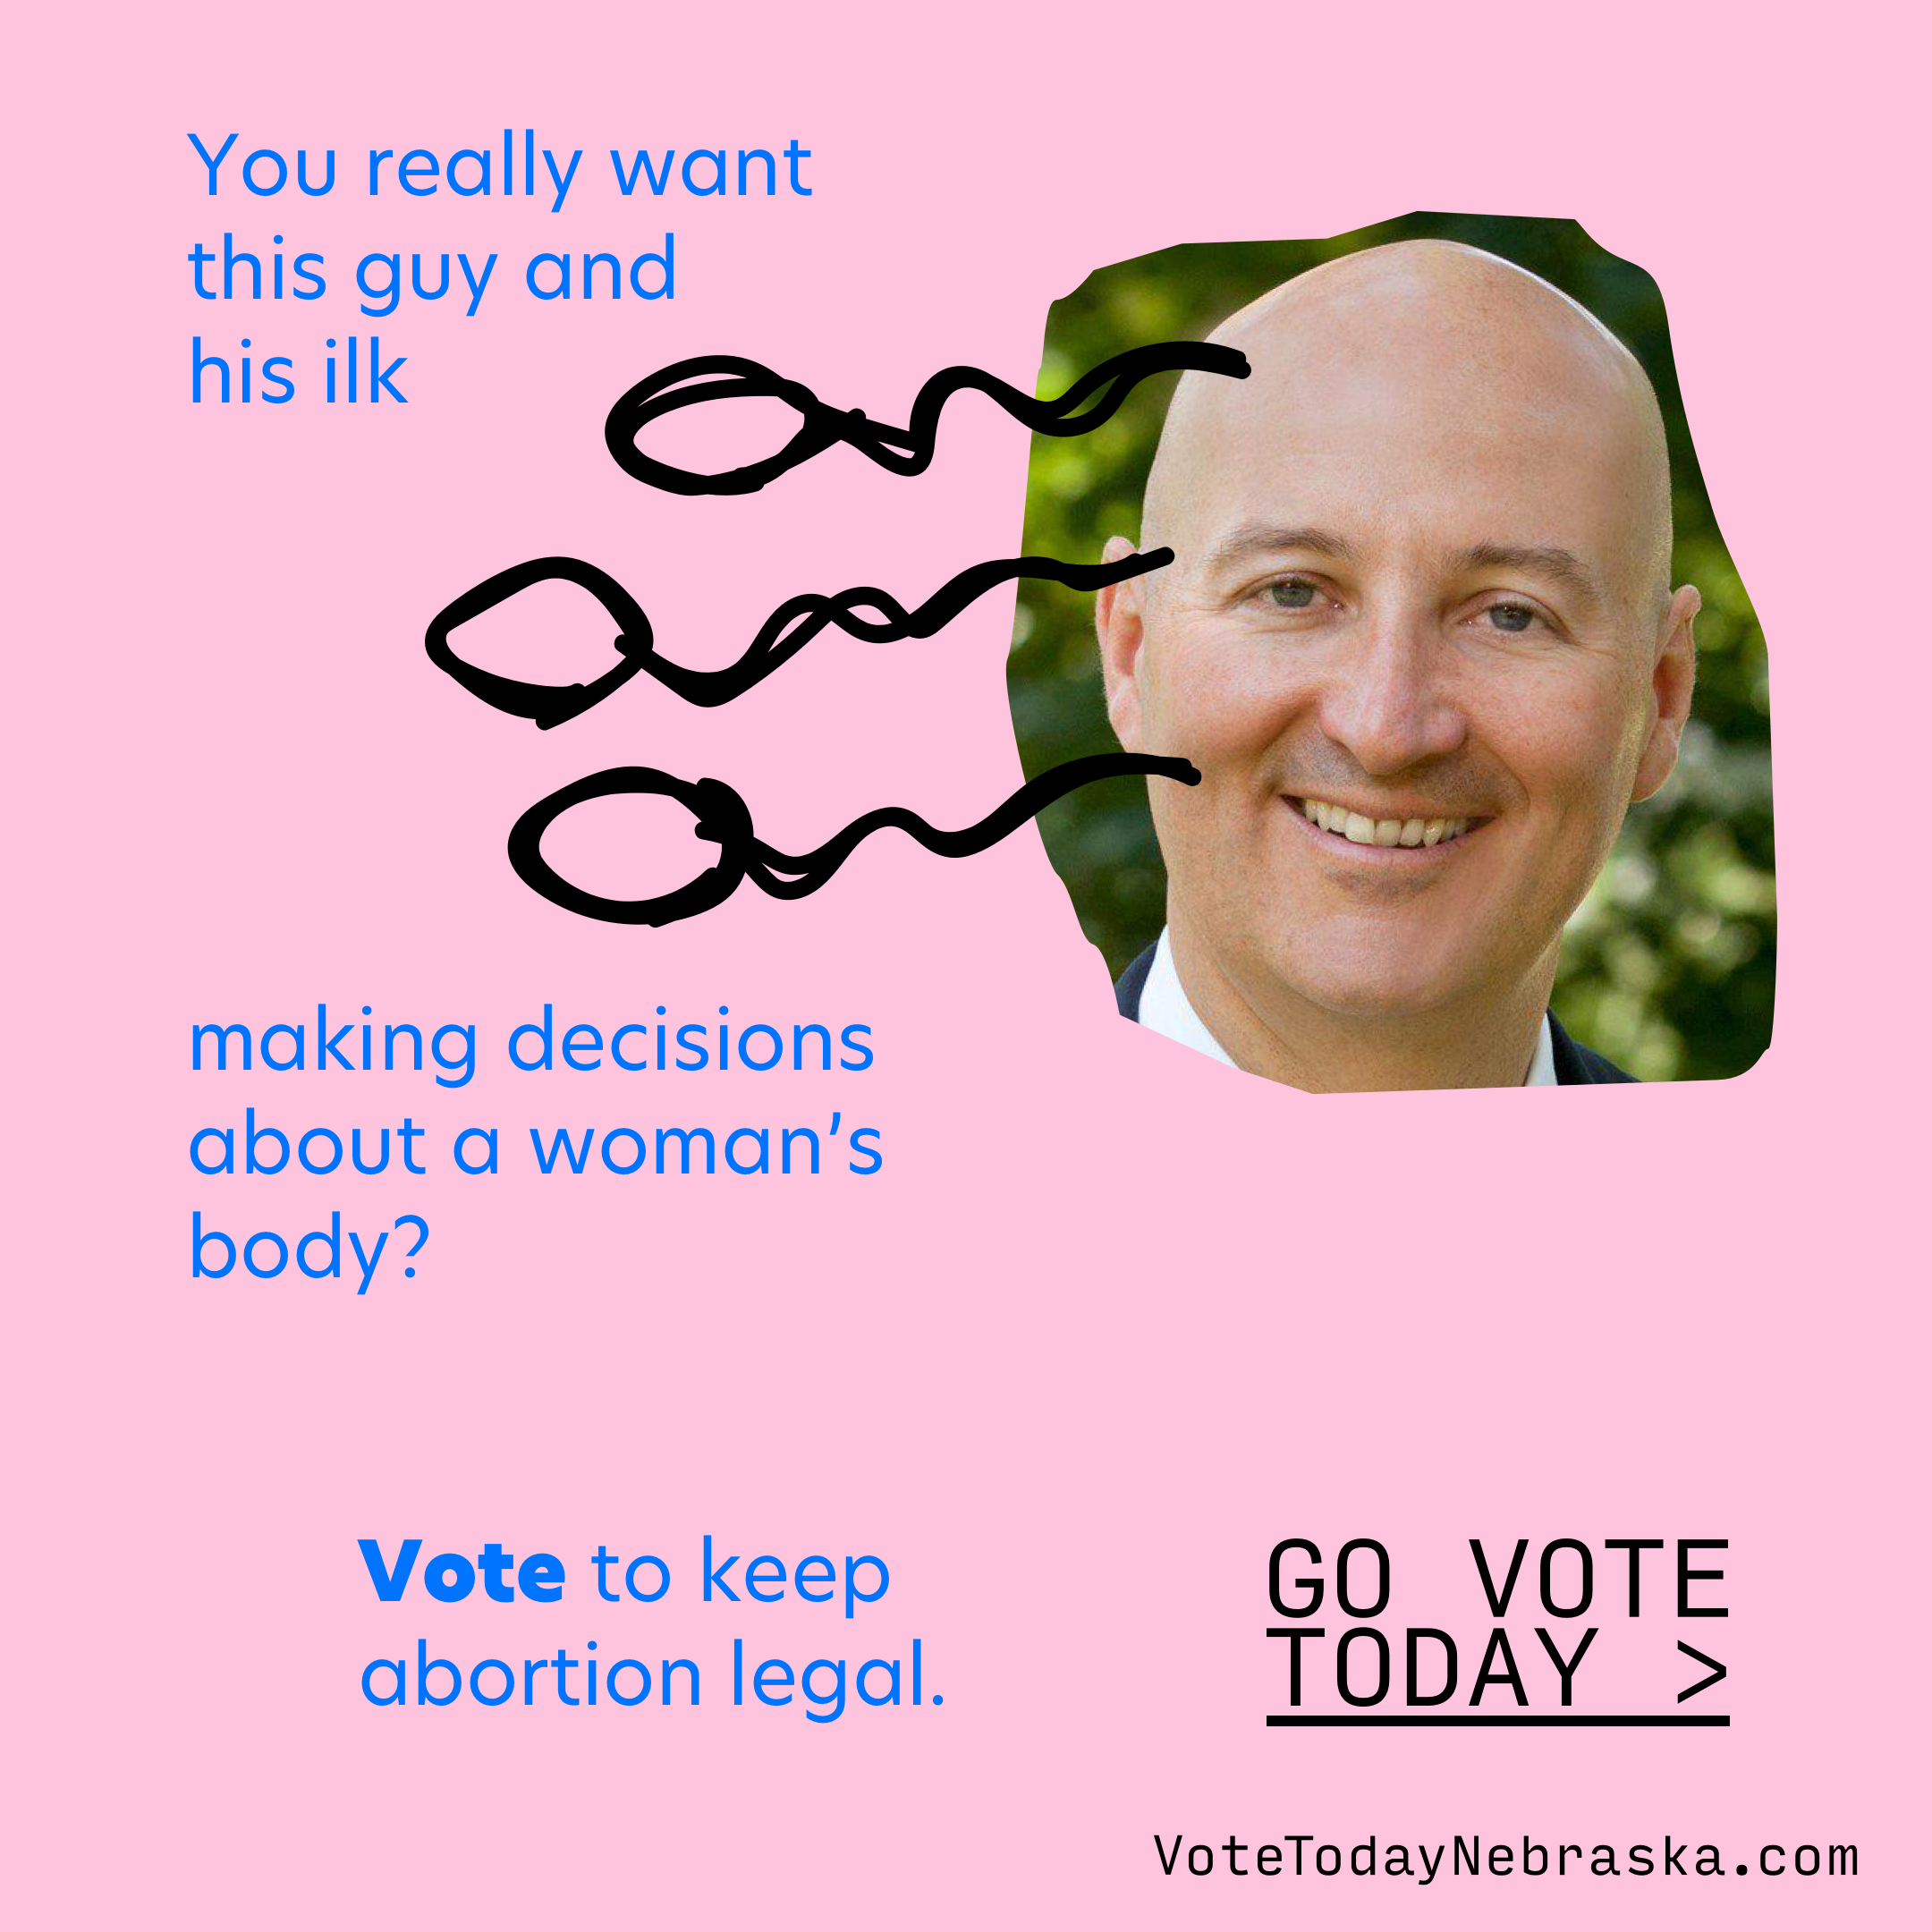 Gov. Ricketts next to drawings of sperm. You really want this guy and 
his ilk making decisions about a woman’s body? Vote to keep abortion legal.